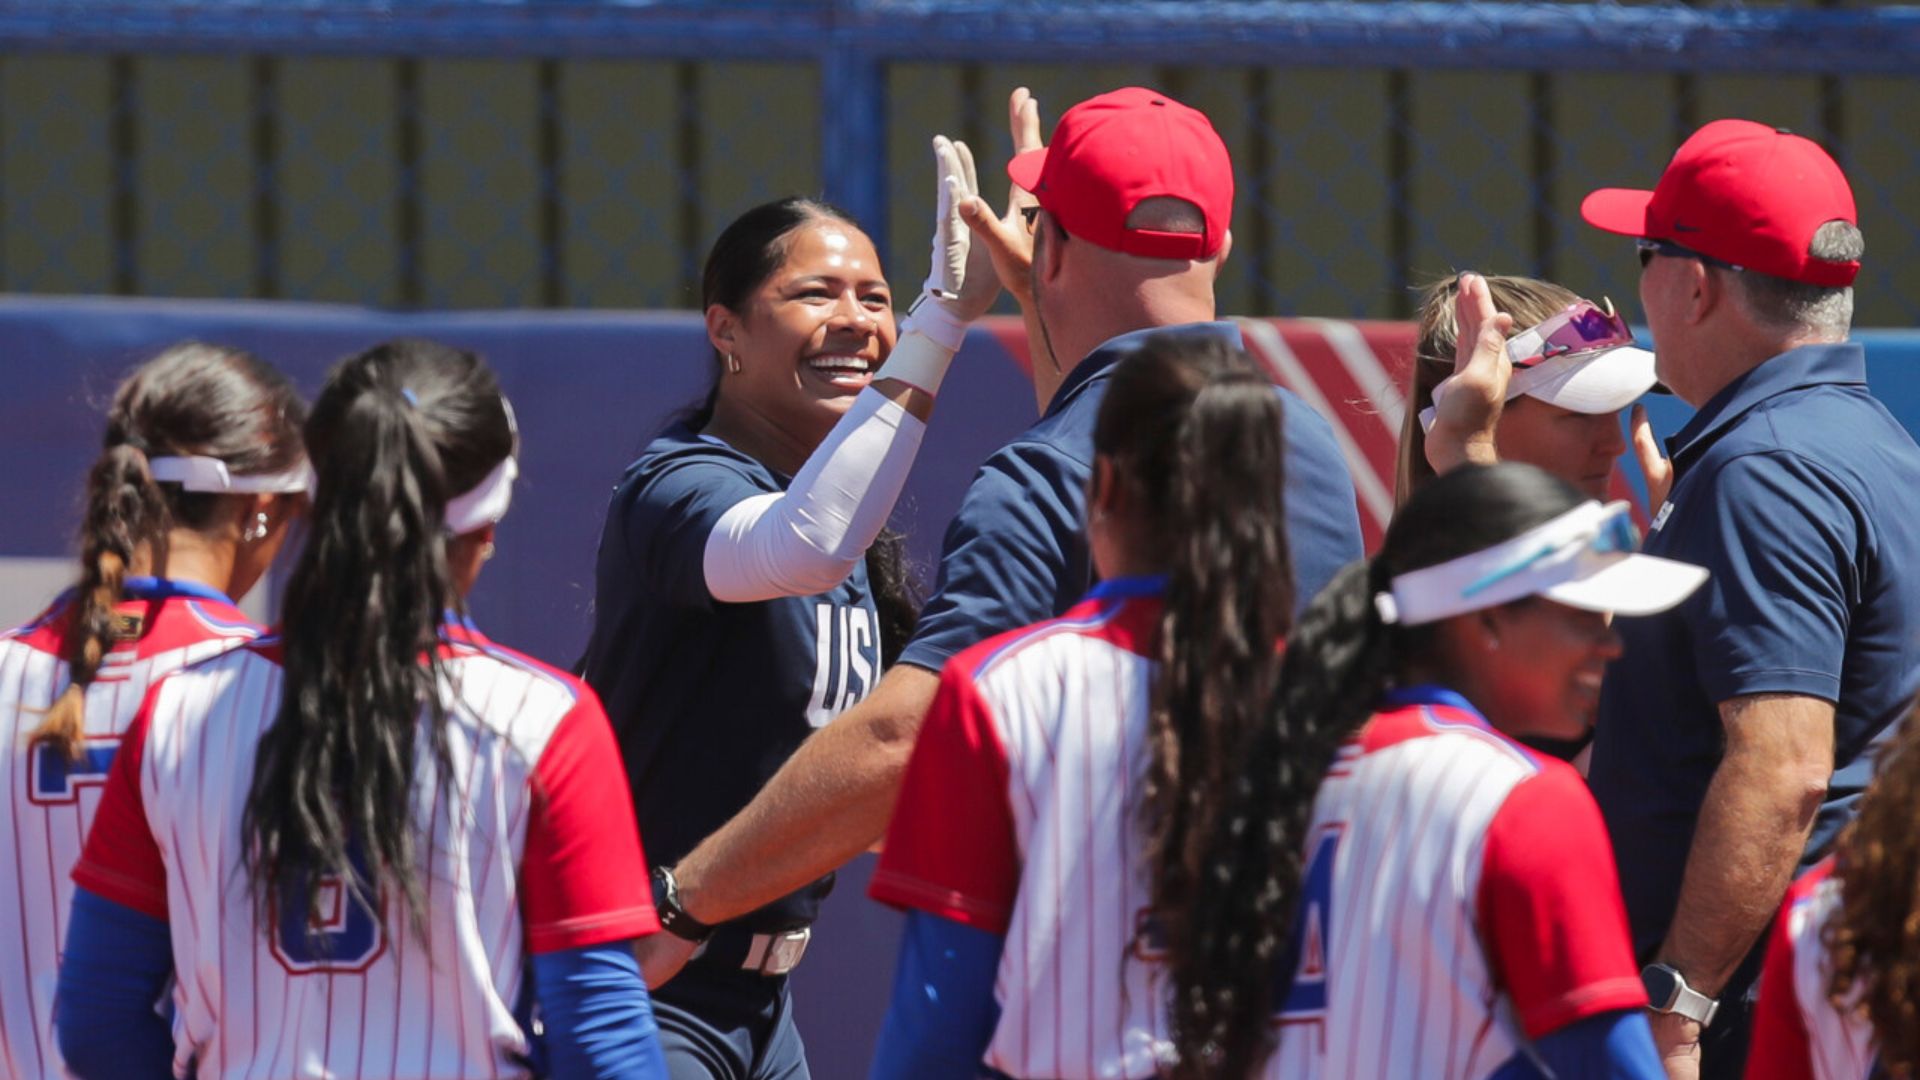 United States and Puerto Rico vie for gold in softball